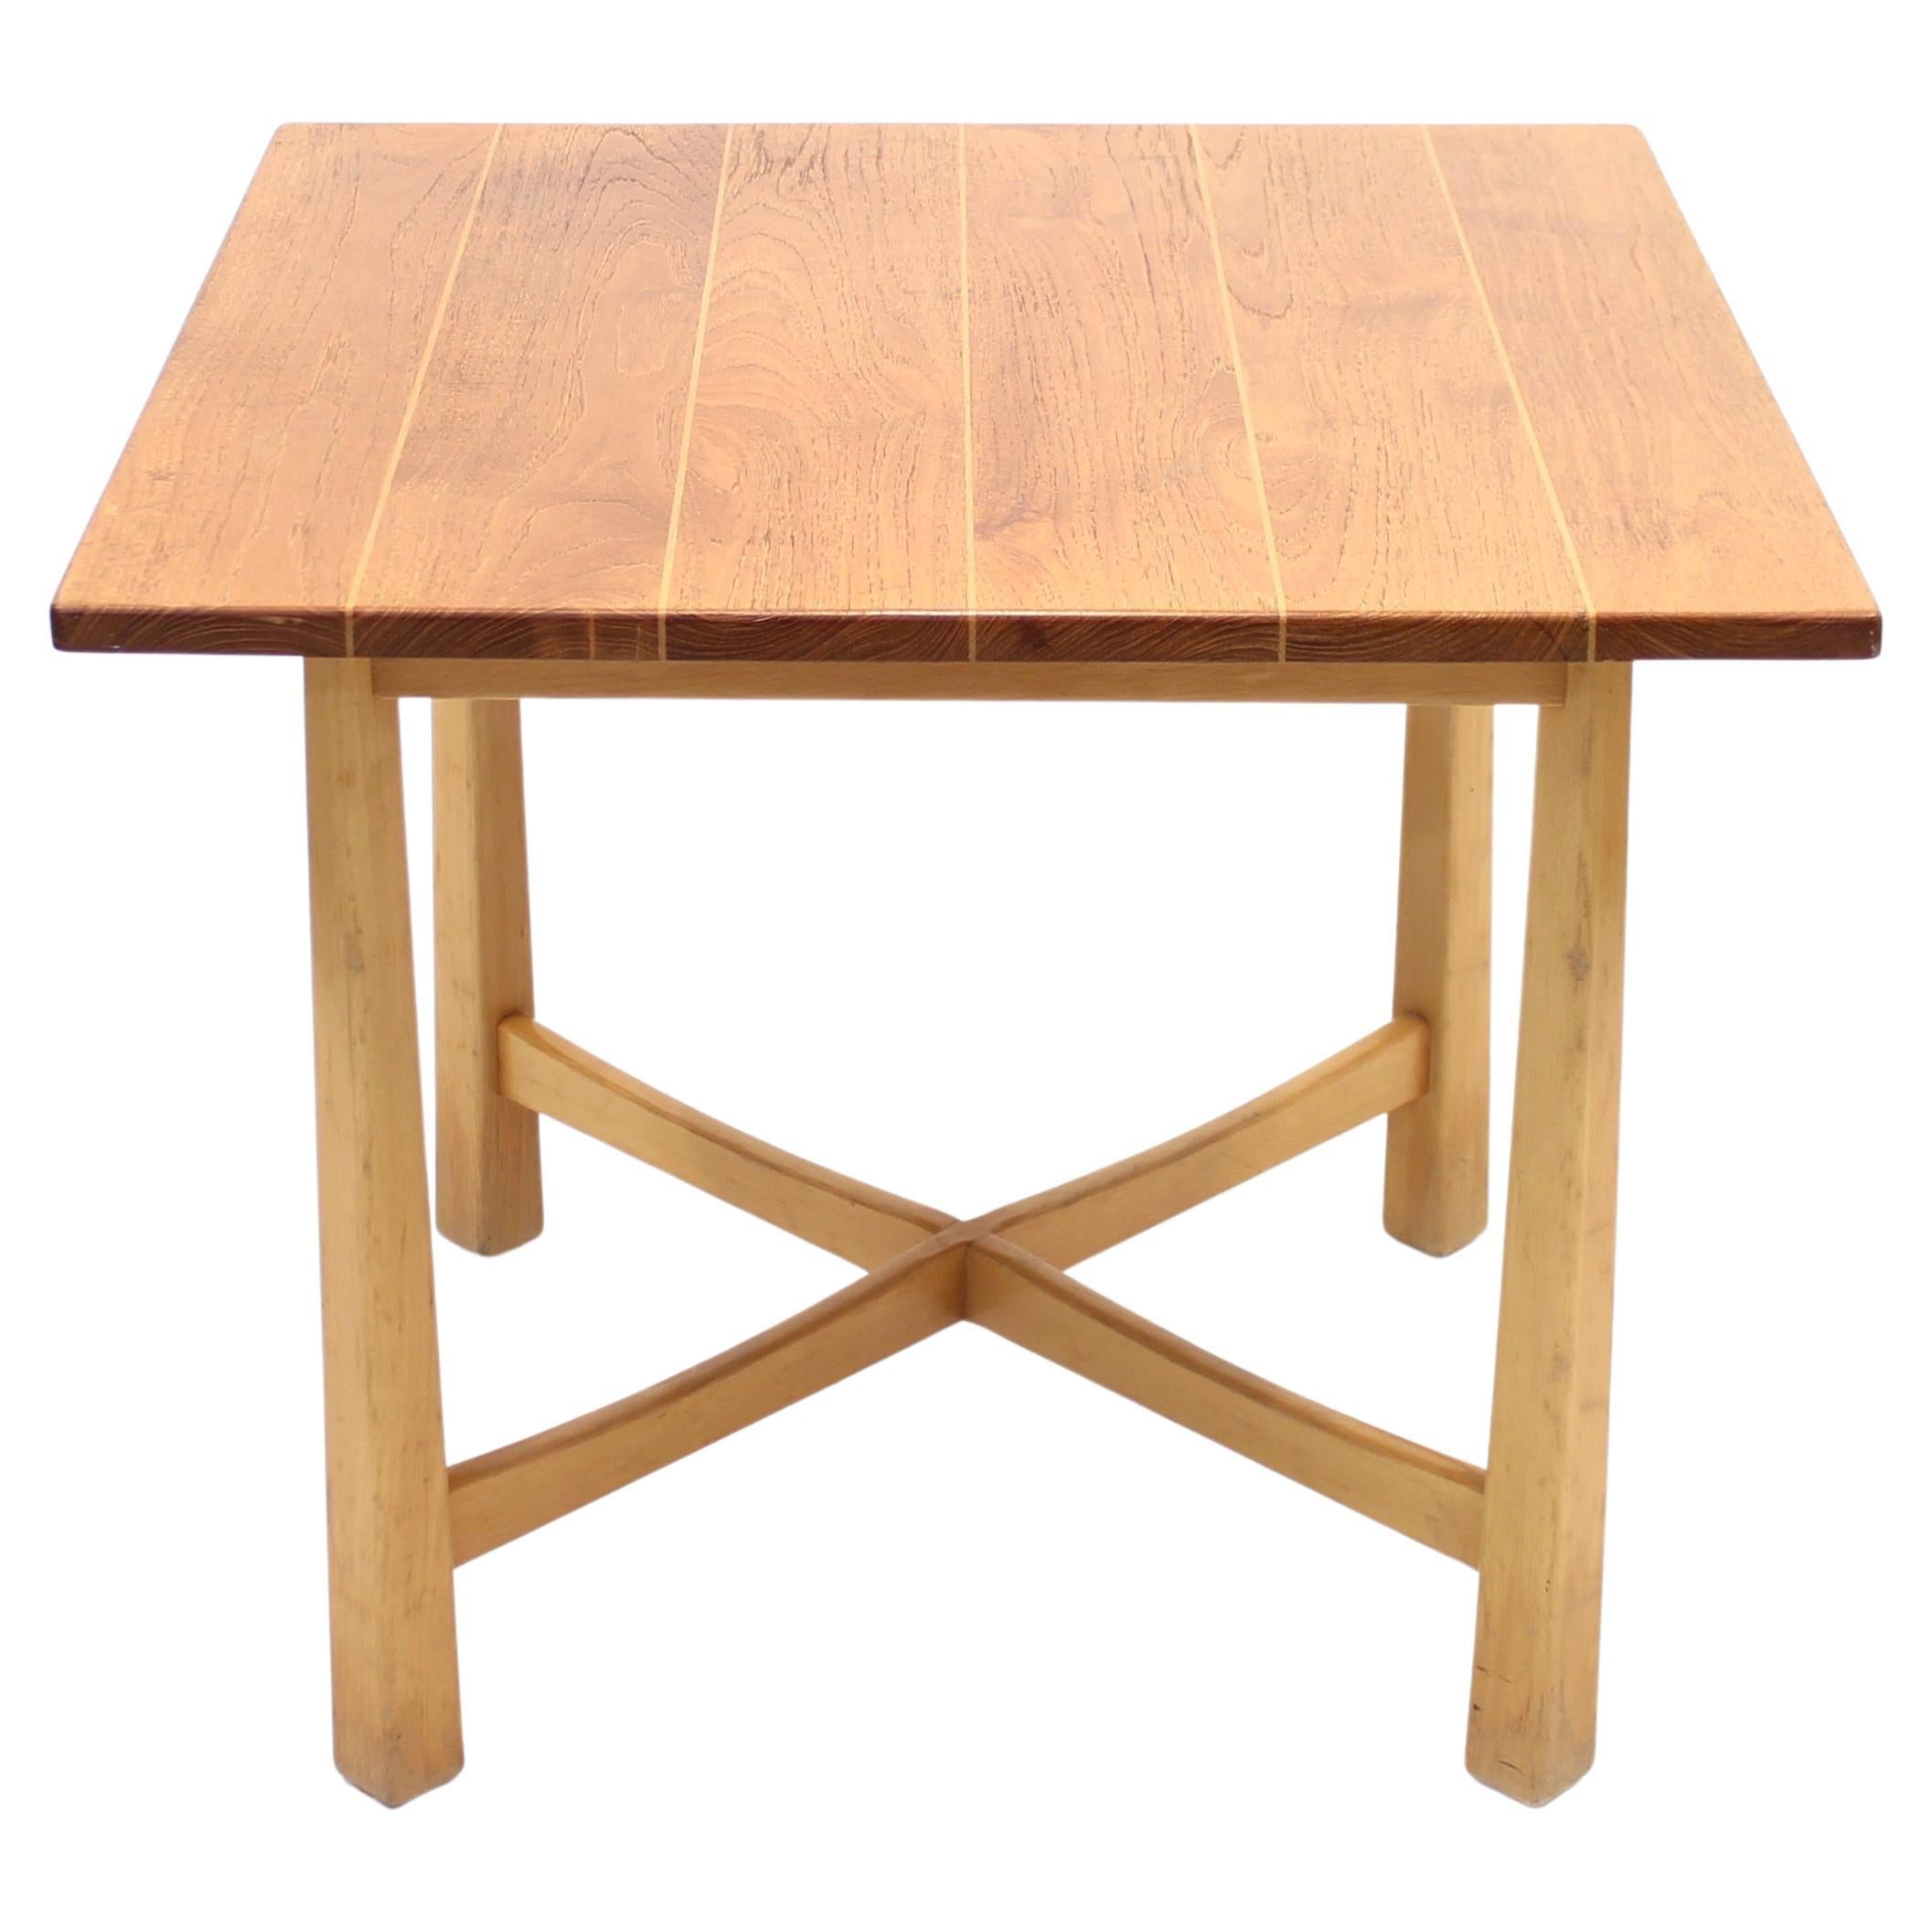 Swedish Modern Teak and Birch Table, Mid-20th Century For Sale